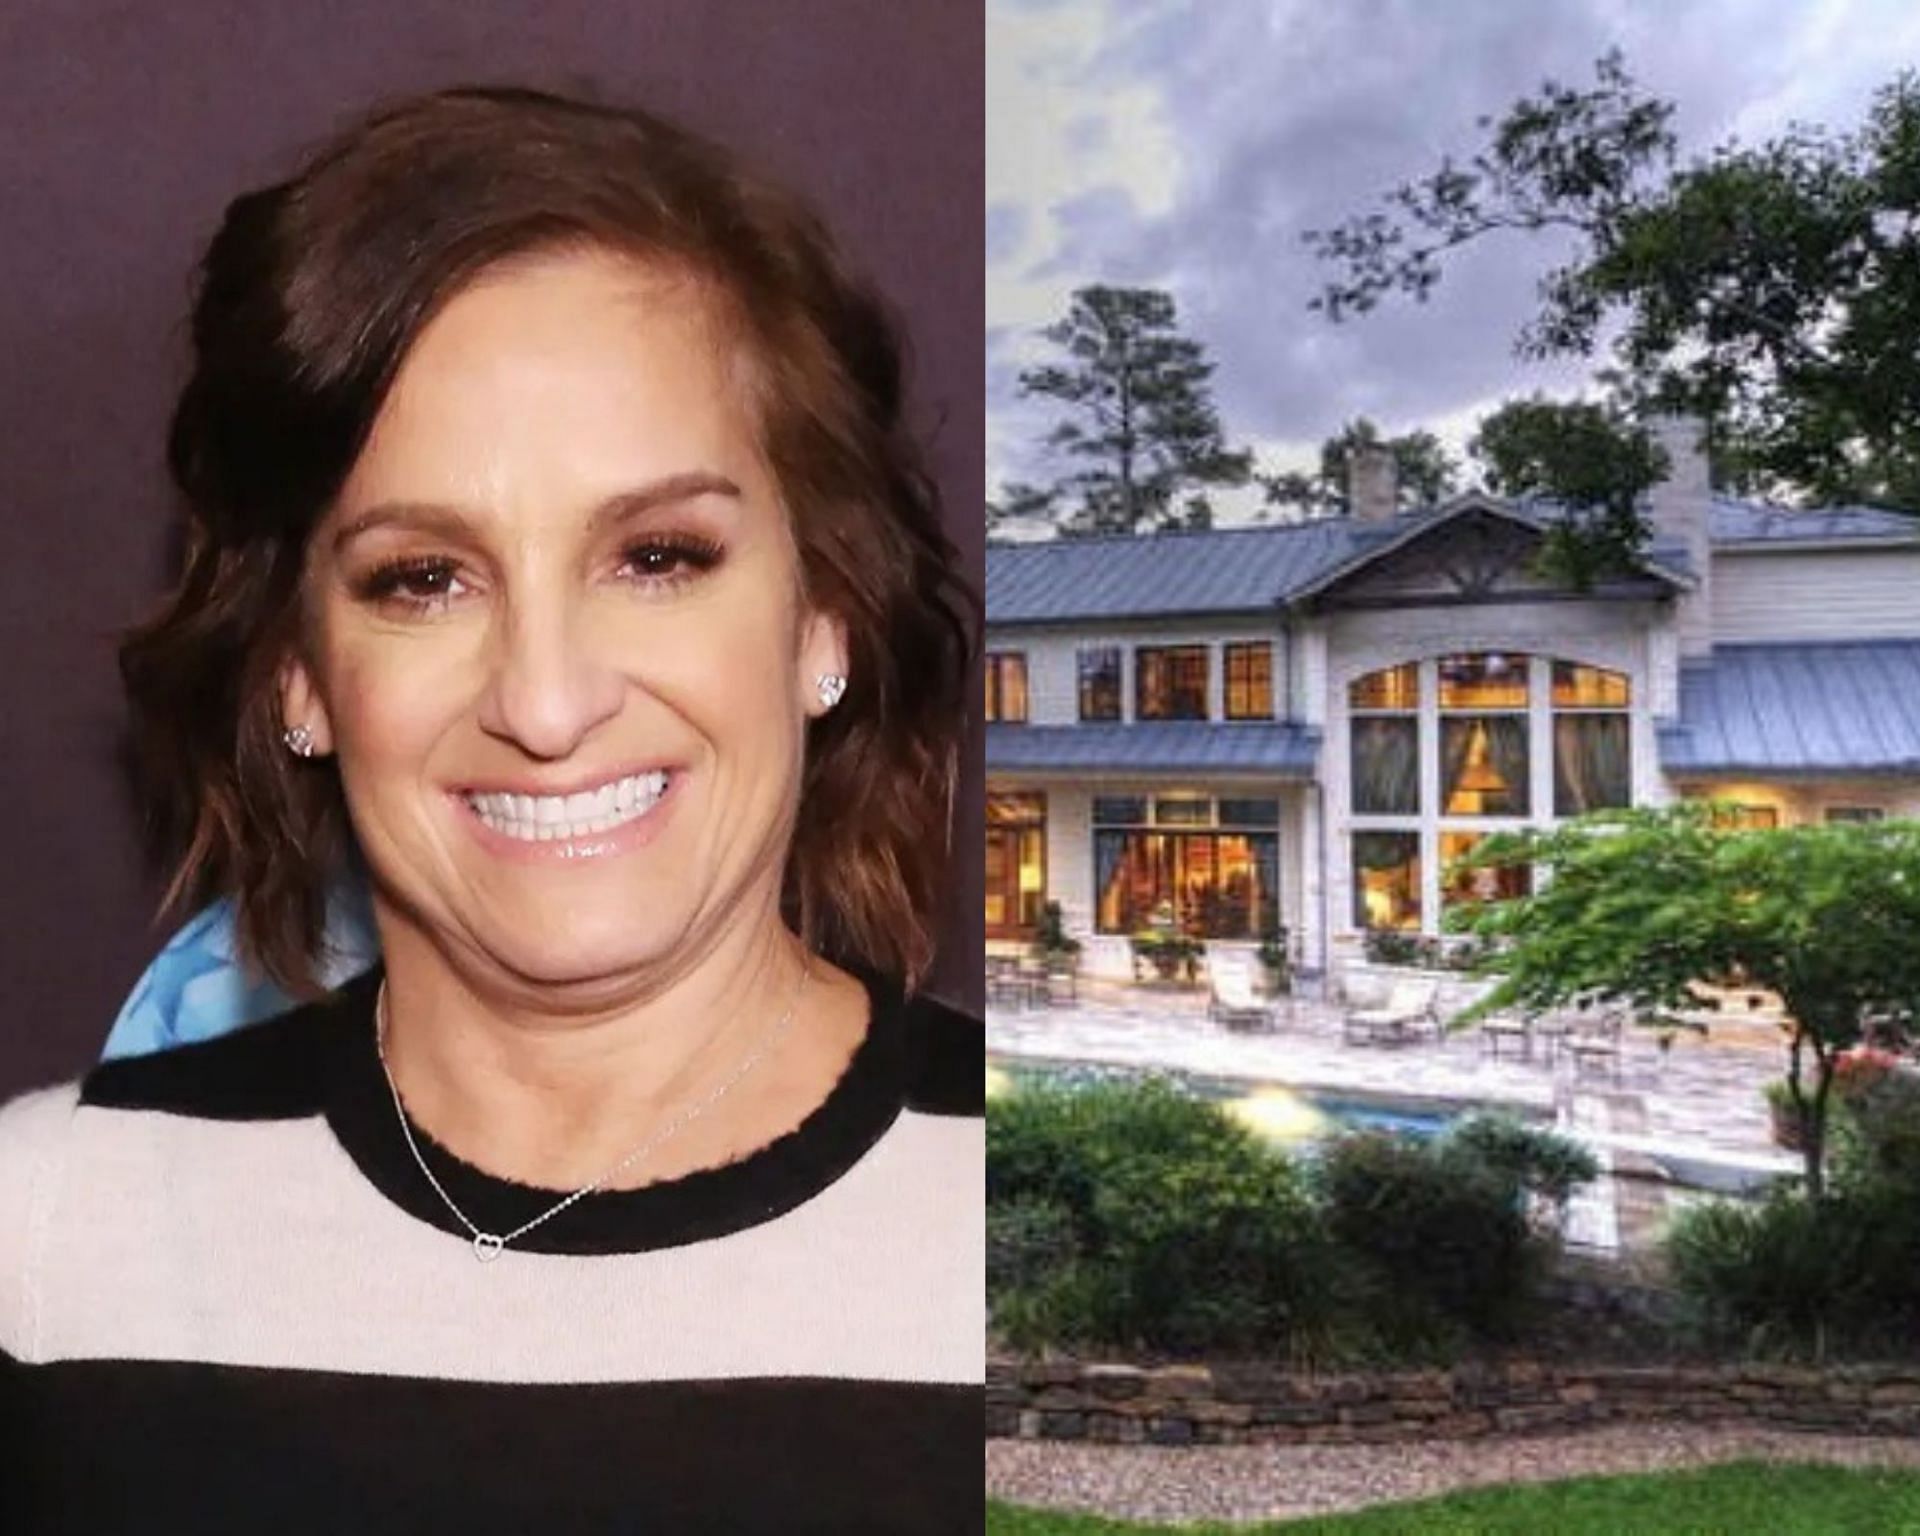 Mary Lou Retton &amp; her Houston house (Mary Pic from Getty Images)